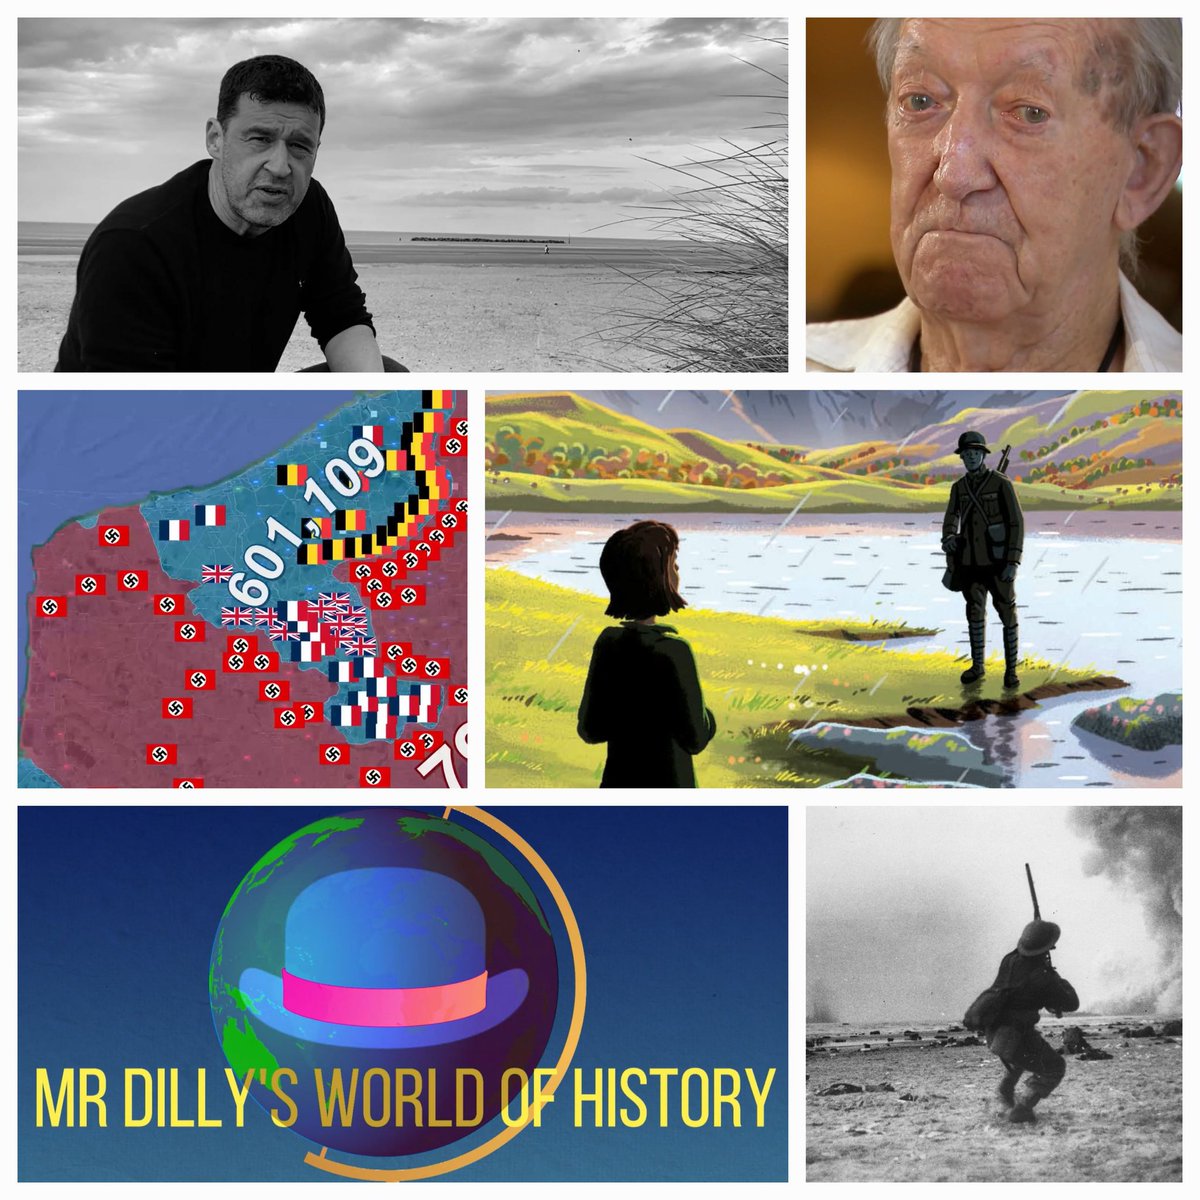 Some stills from the Mr Dilly's World of History Angel of Grasmere #WWII event that me & @tompalmerauthor are presenting next week. Moving, educational & inspiring. Join us FREE, live & virtual 9th May 11am Book tinyurl.com/2ep5a6rp #edutwitter #kidlit #dunkirk #History